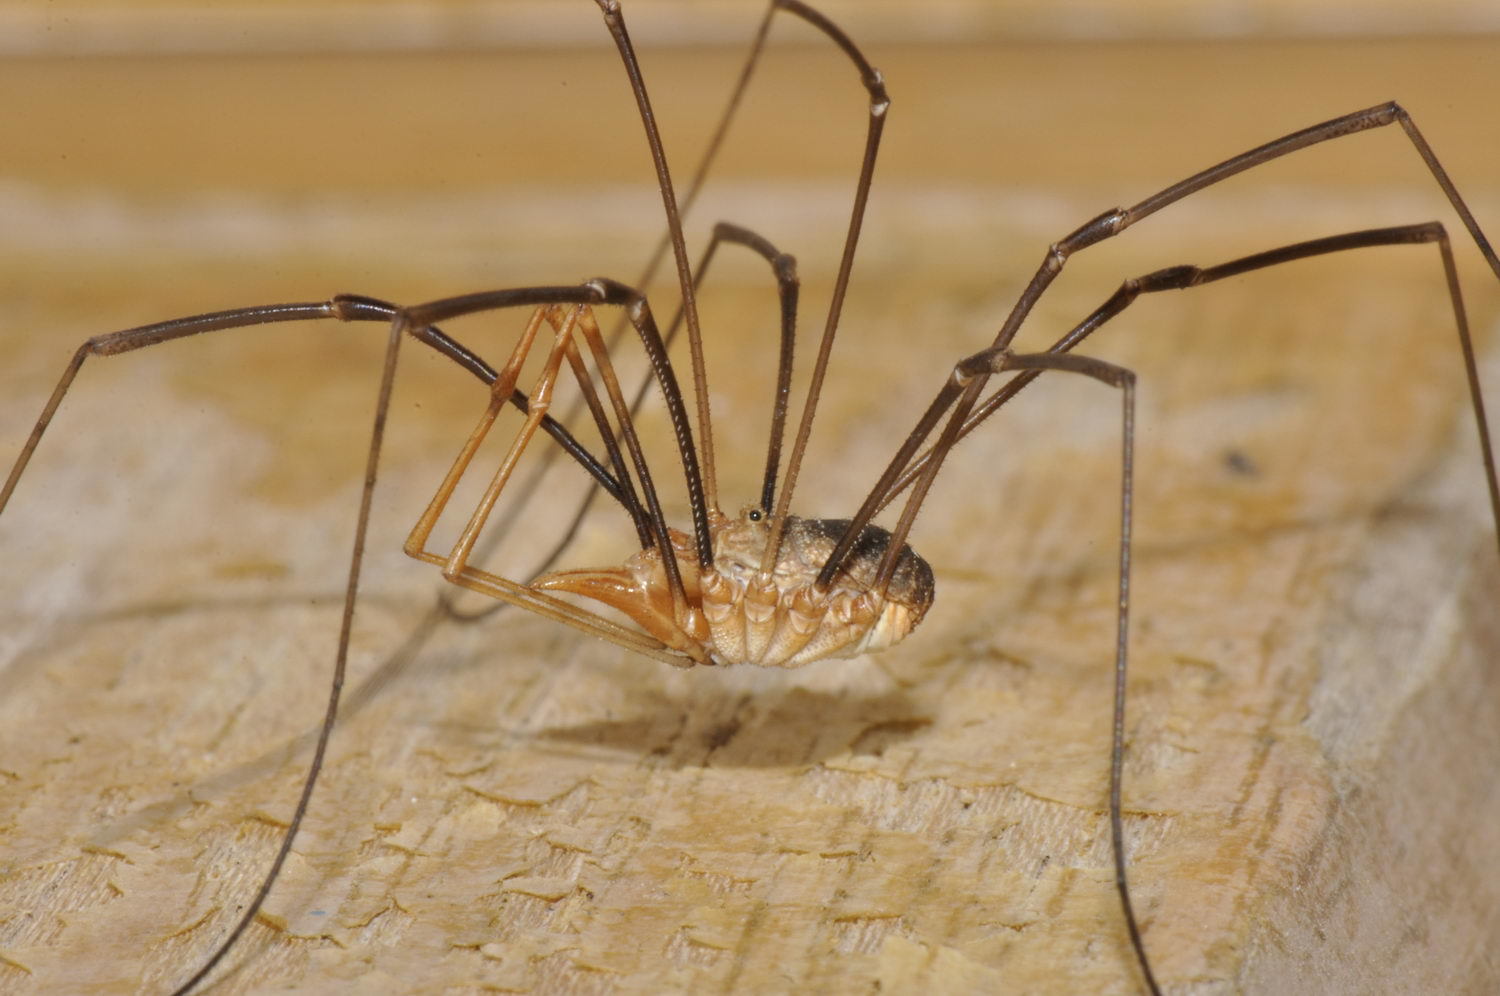 how do spiders eat their prey and do spiders suck blood from their victims